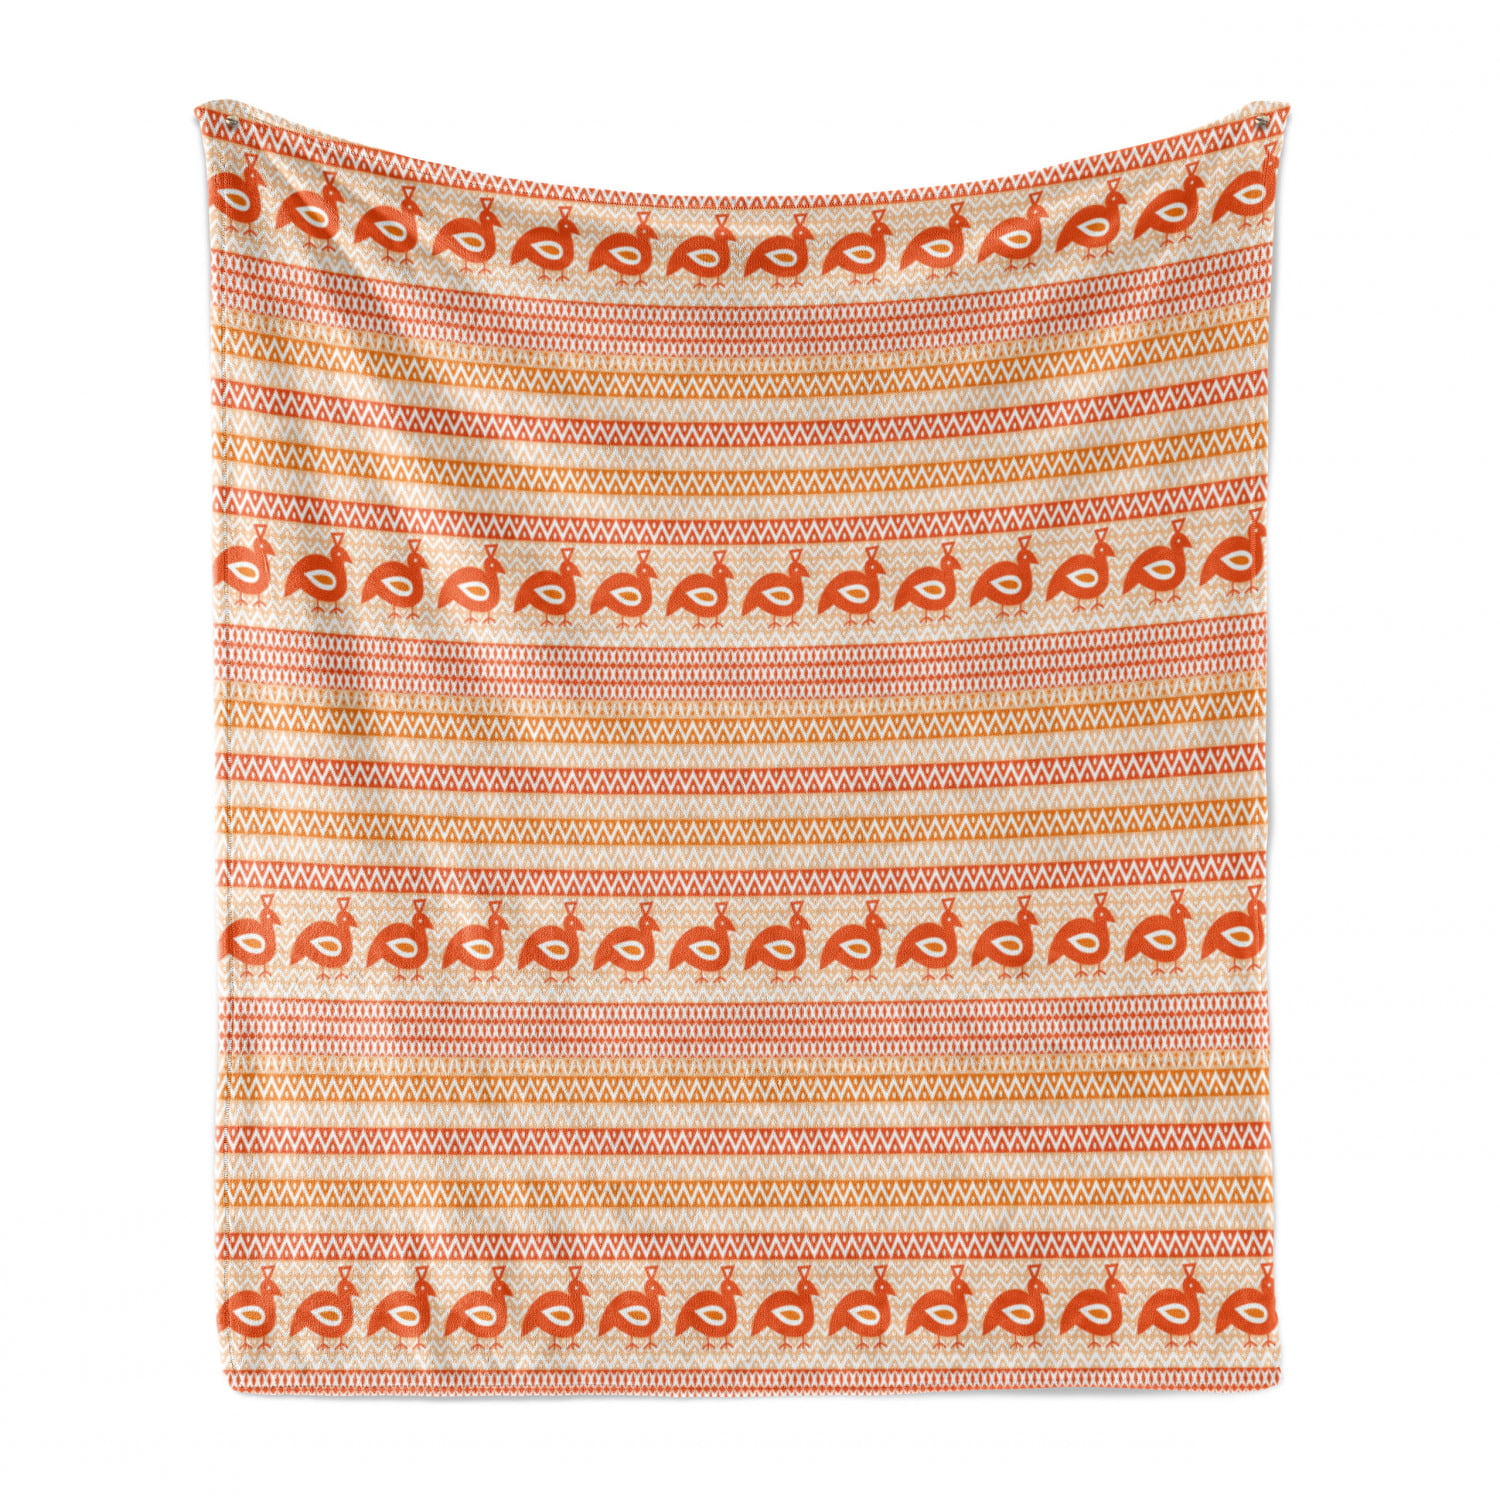 Traditional Motifs in Brown Shades Indigenous Culture 50 x 70 Pale Brown Brown Ambesonne Kente Pattern Soft Flannel Fleece Throw Blanket Cozy Plush for Indoor and Outdoor Use 